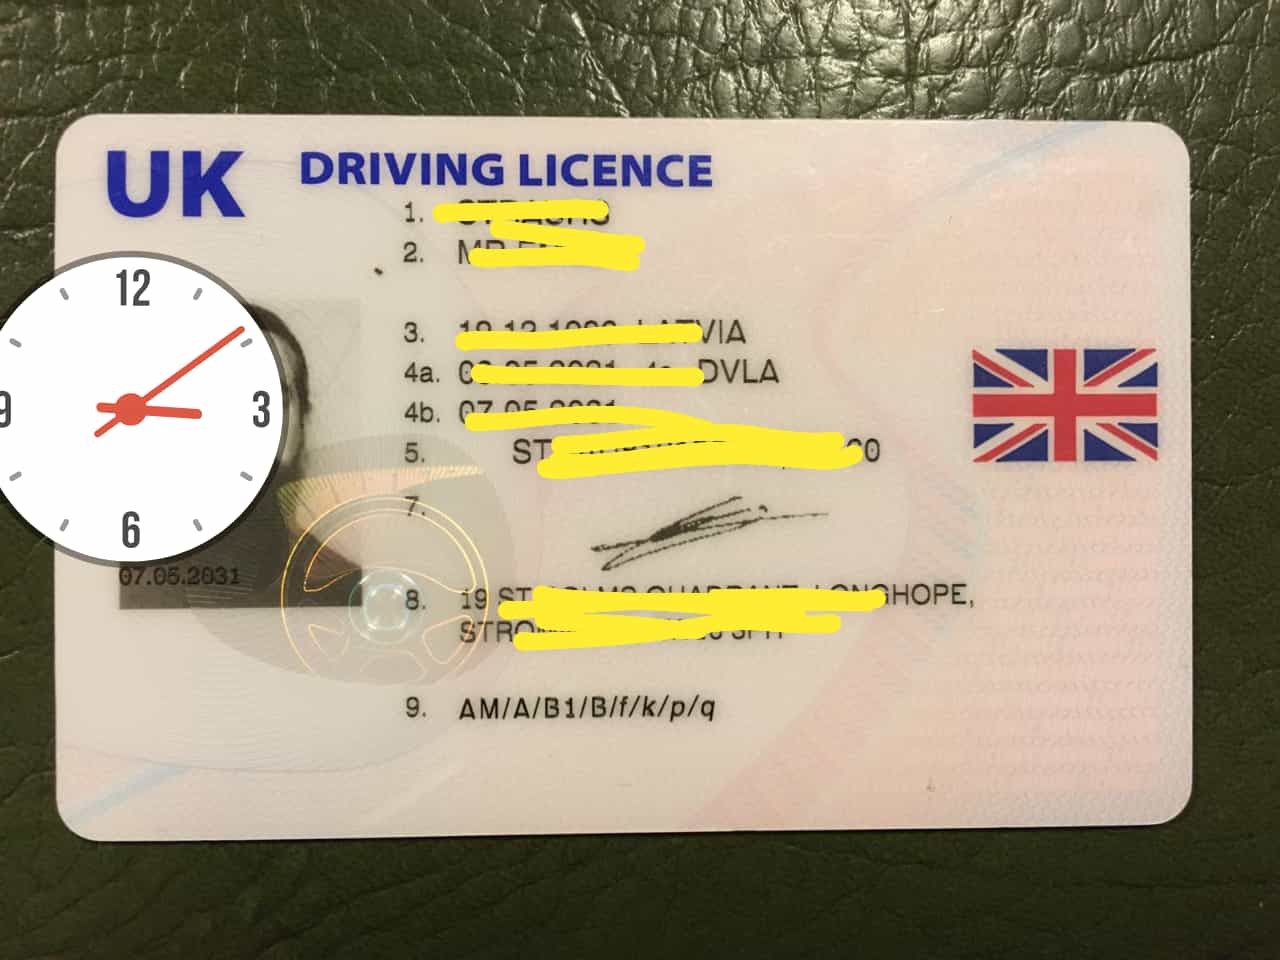 Best place to buy legal UK driving license